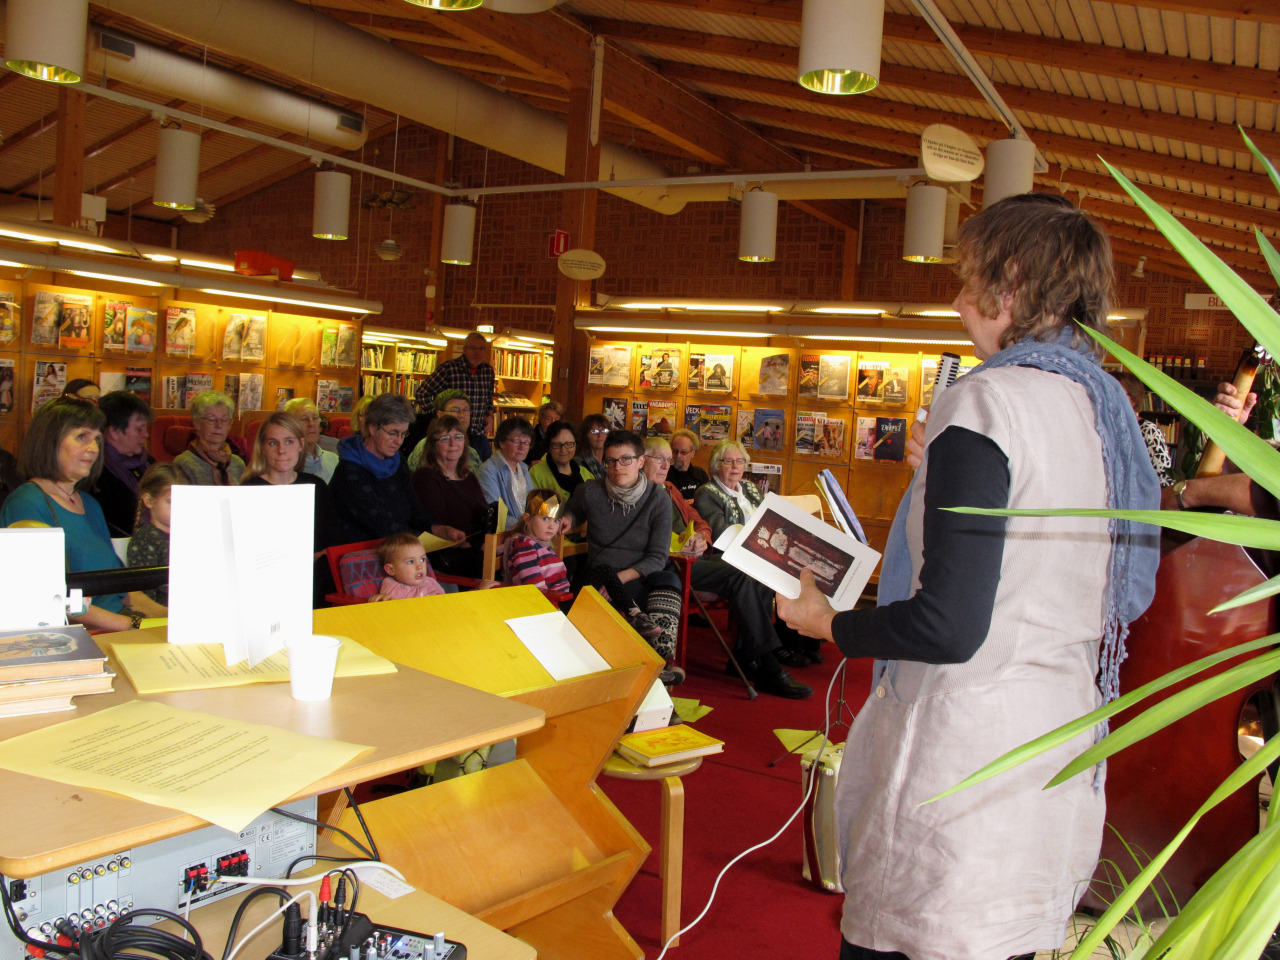 Poetry and music event in connection with ICPD+20, 8 of march 2014, Sweden.